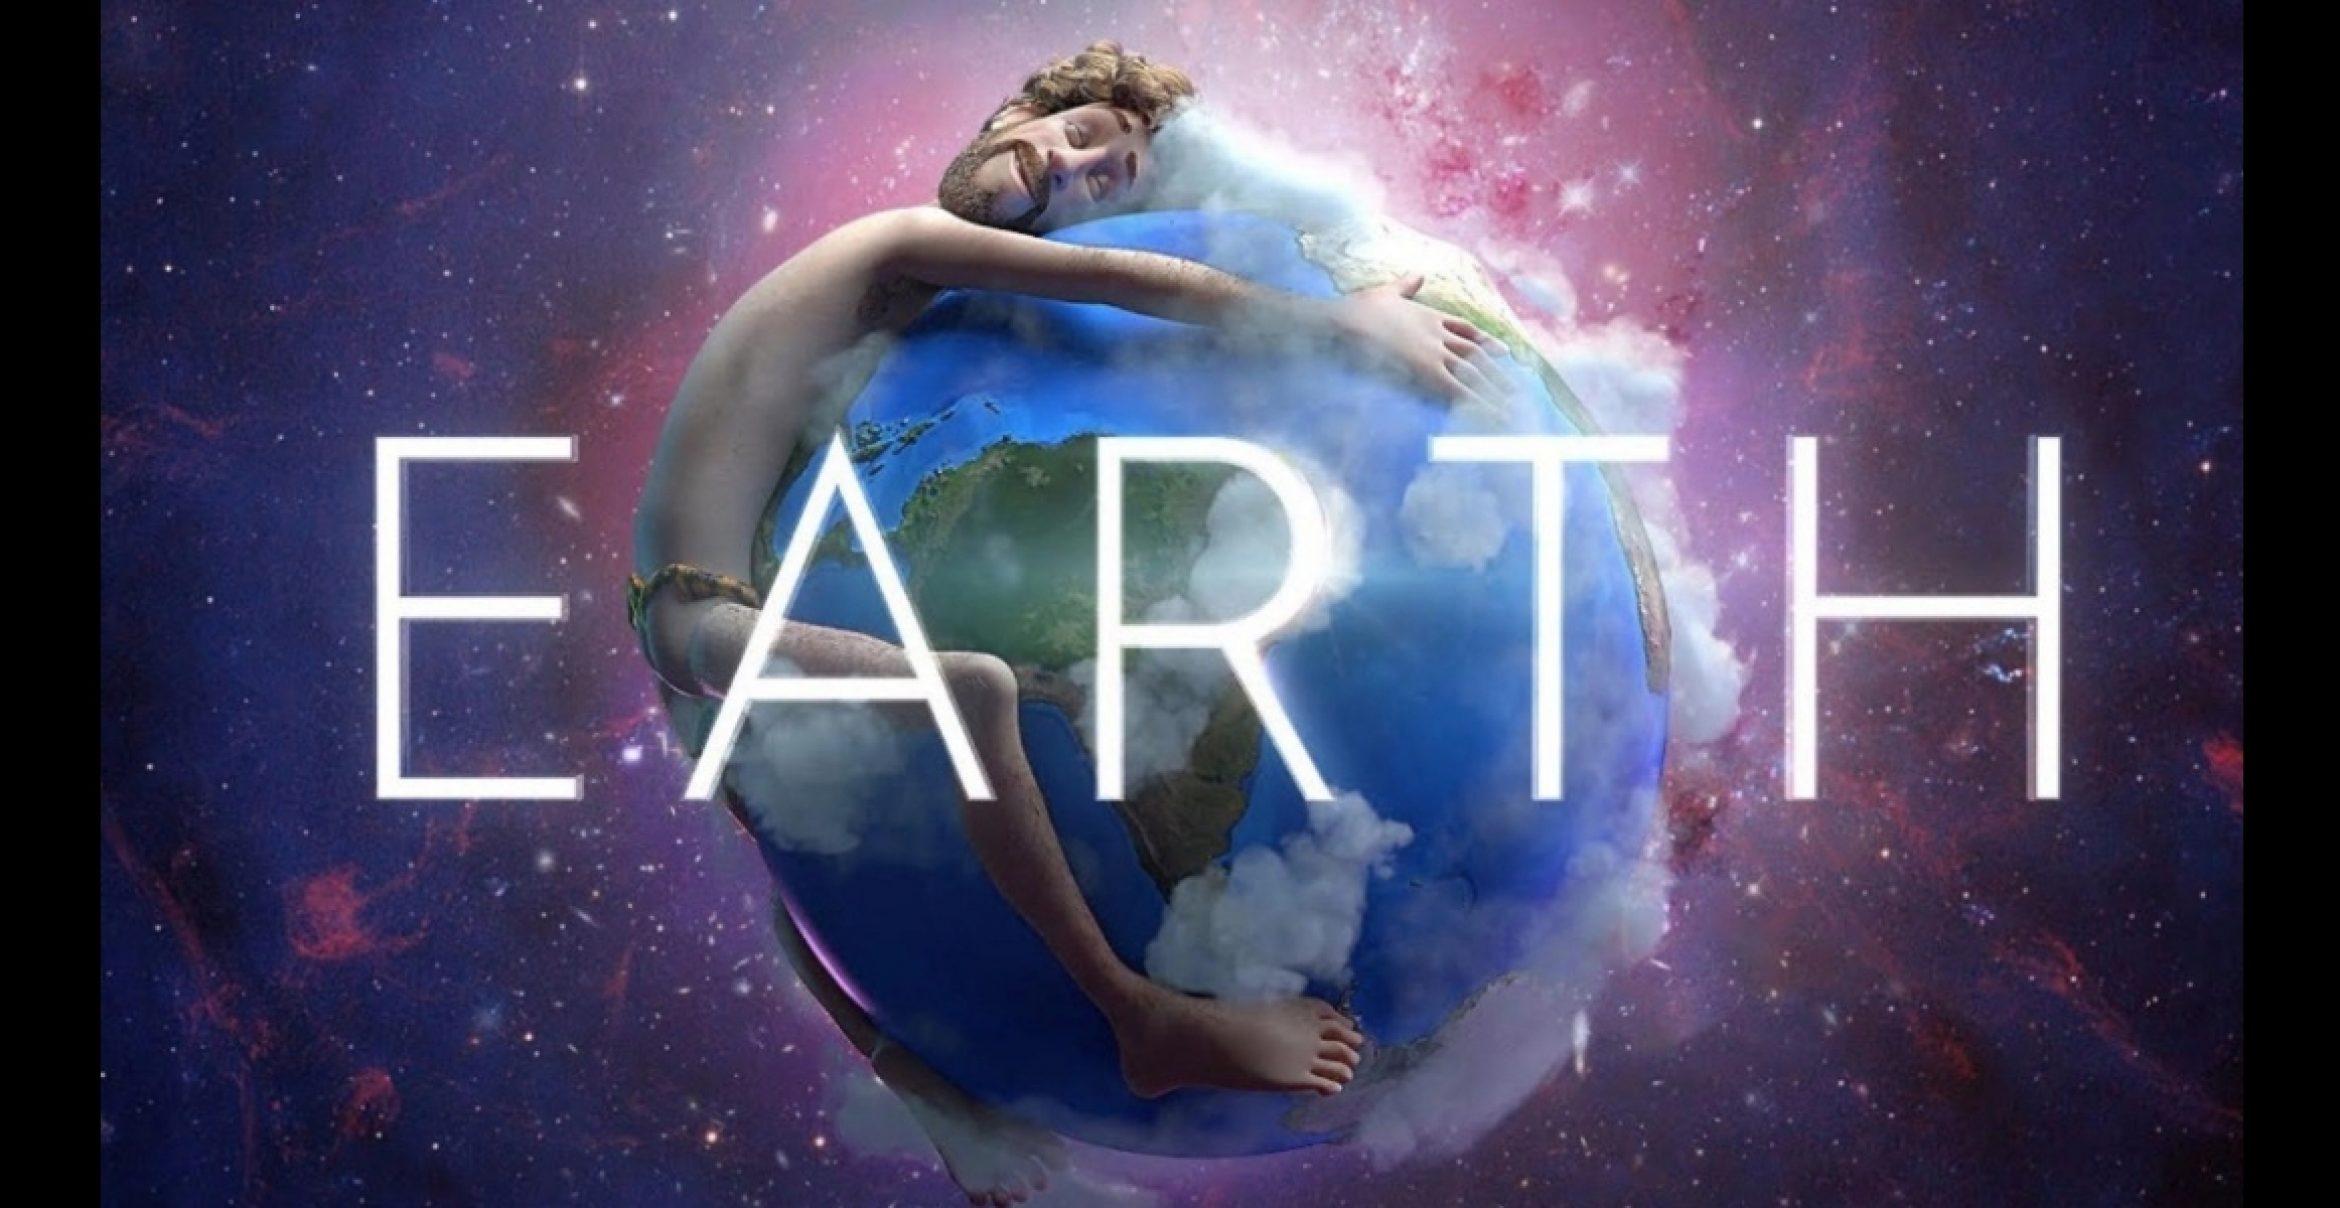 US-Rapper Lil Dicky droppt Umweltschutz-Song “Earth“